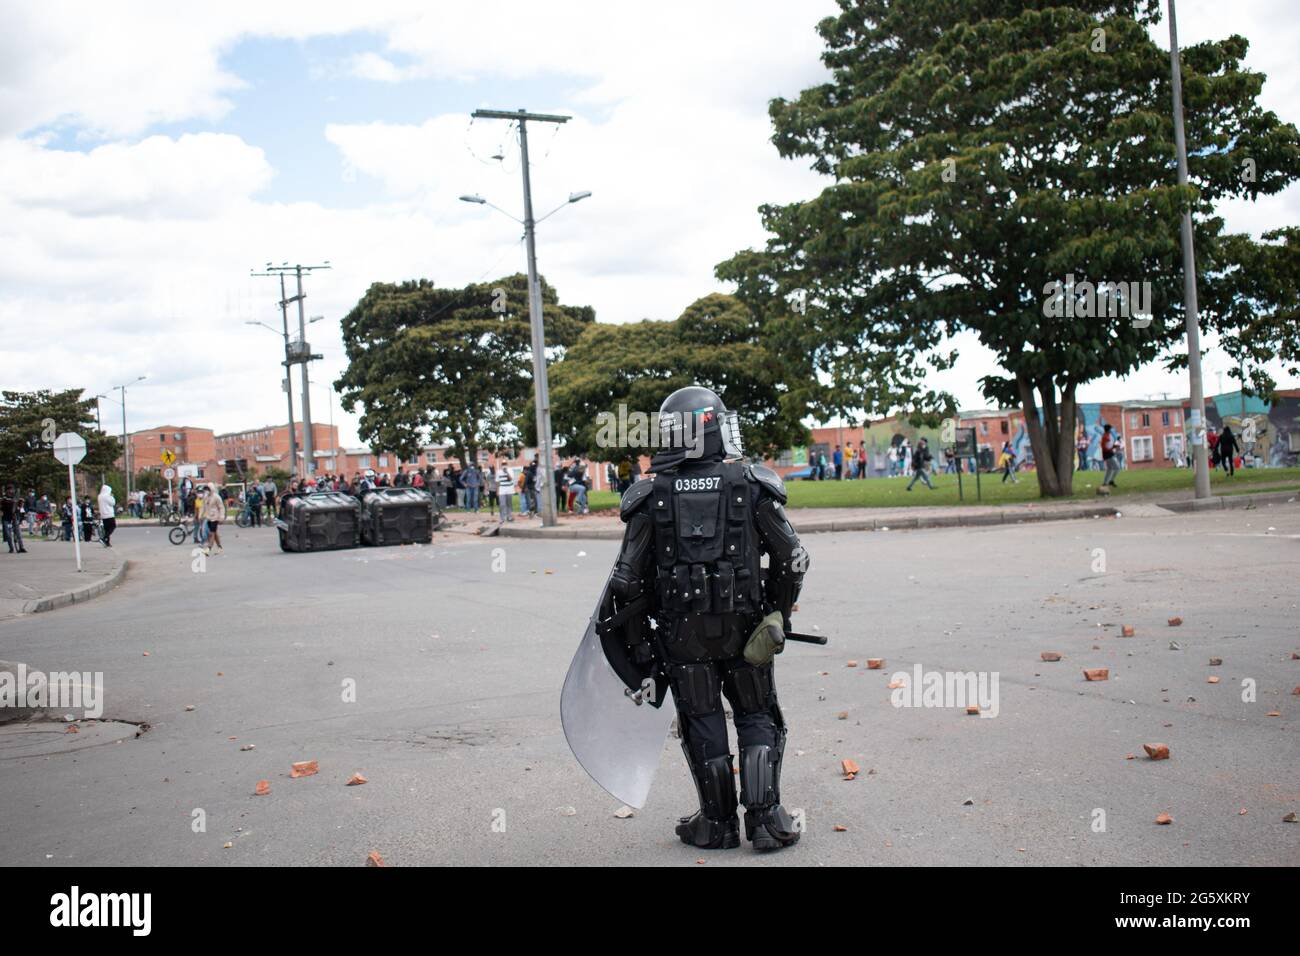 Colombia's riot police officers (ESMAD) use police batons, tear gas canisters and flashbang grendandes, stunt grenades, as people of Fontanar - Suba in Bogota, Colombia protested and clashed against Colombia's riot police (Escuadron Movil Antidisturbios ESMAD) against the visit of Colombia's president Ivan Duque Marquez to a park were Bogota's metro system will be built, amidst two months of anti-government protests against president Ivan Duque Marquez, inequalities and police unrest during the protests, on June 29, 2021. Stock Photo